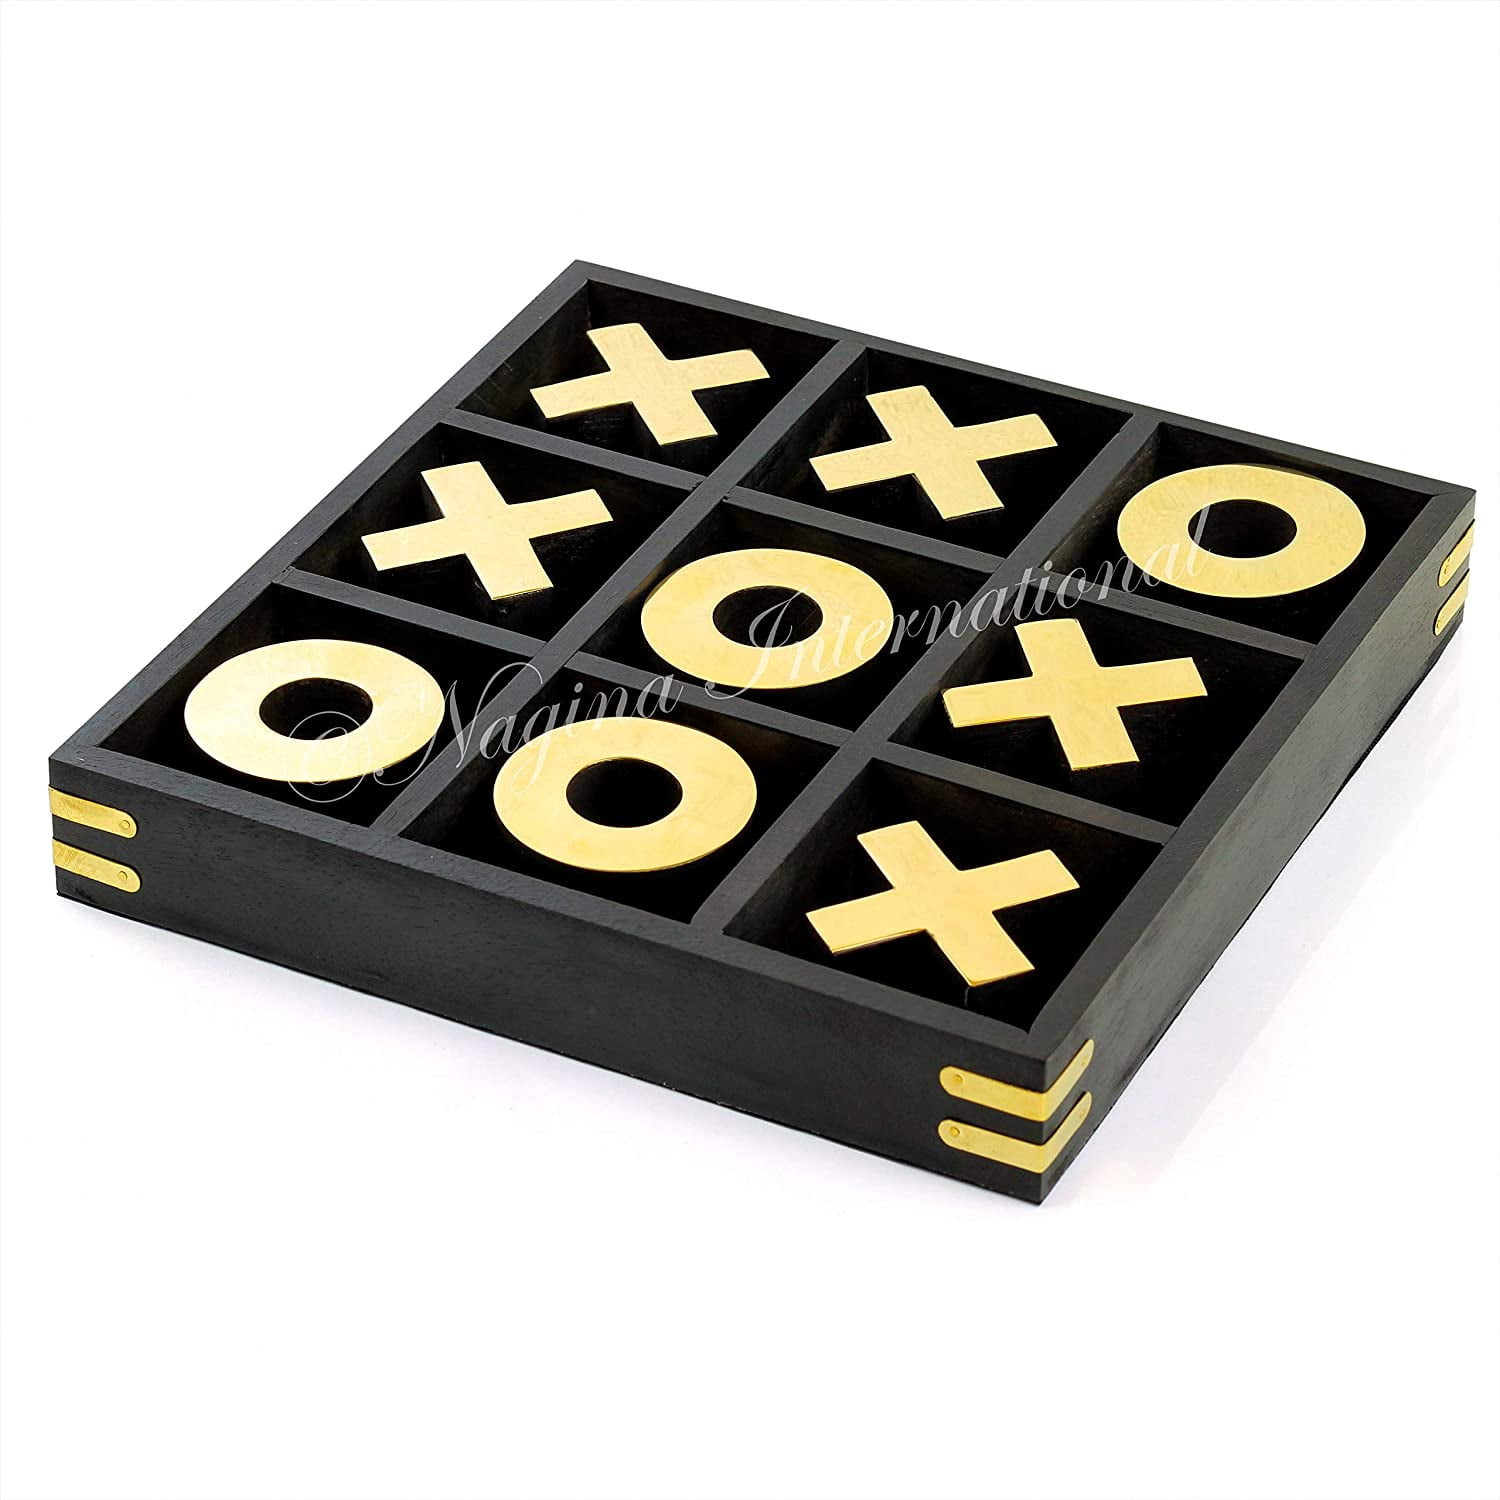 Buy Wood Tic Tac Toe - Coffee Table Puzzle (5x5) Living Room Game